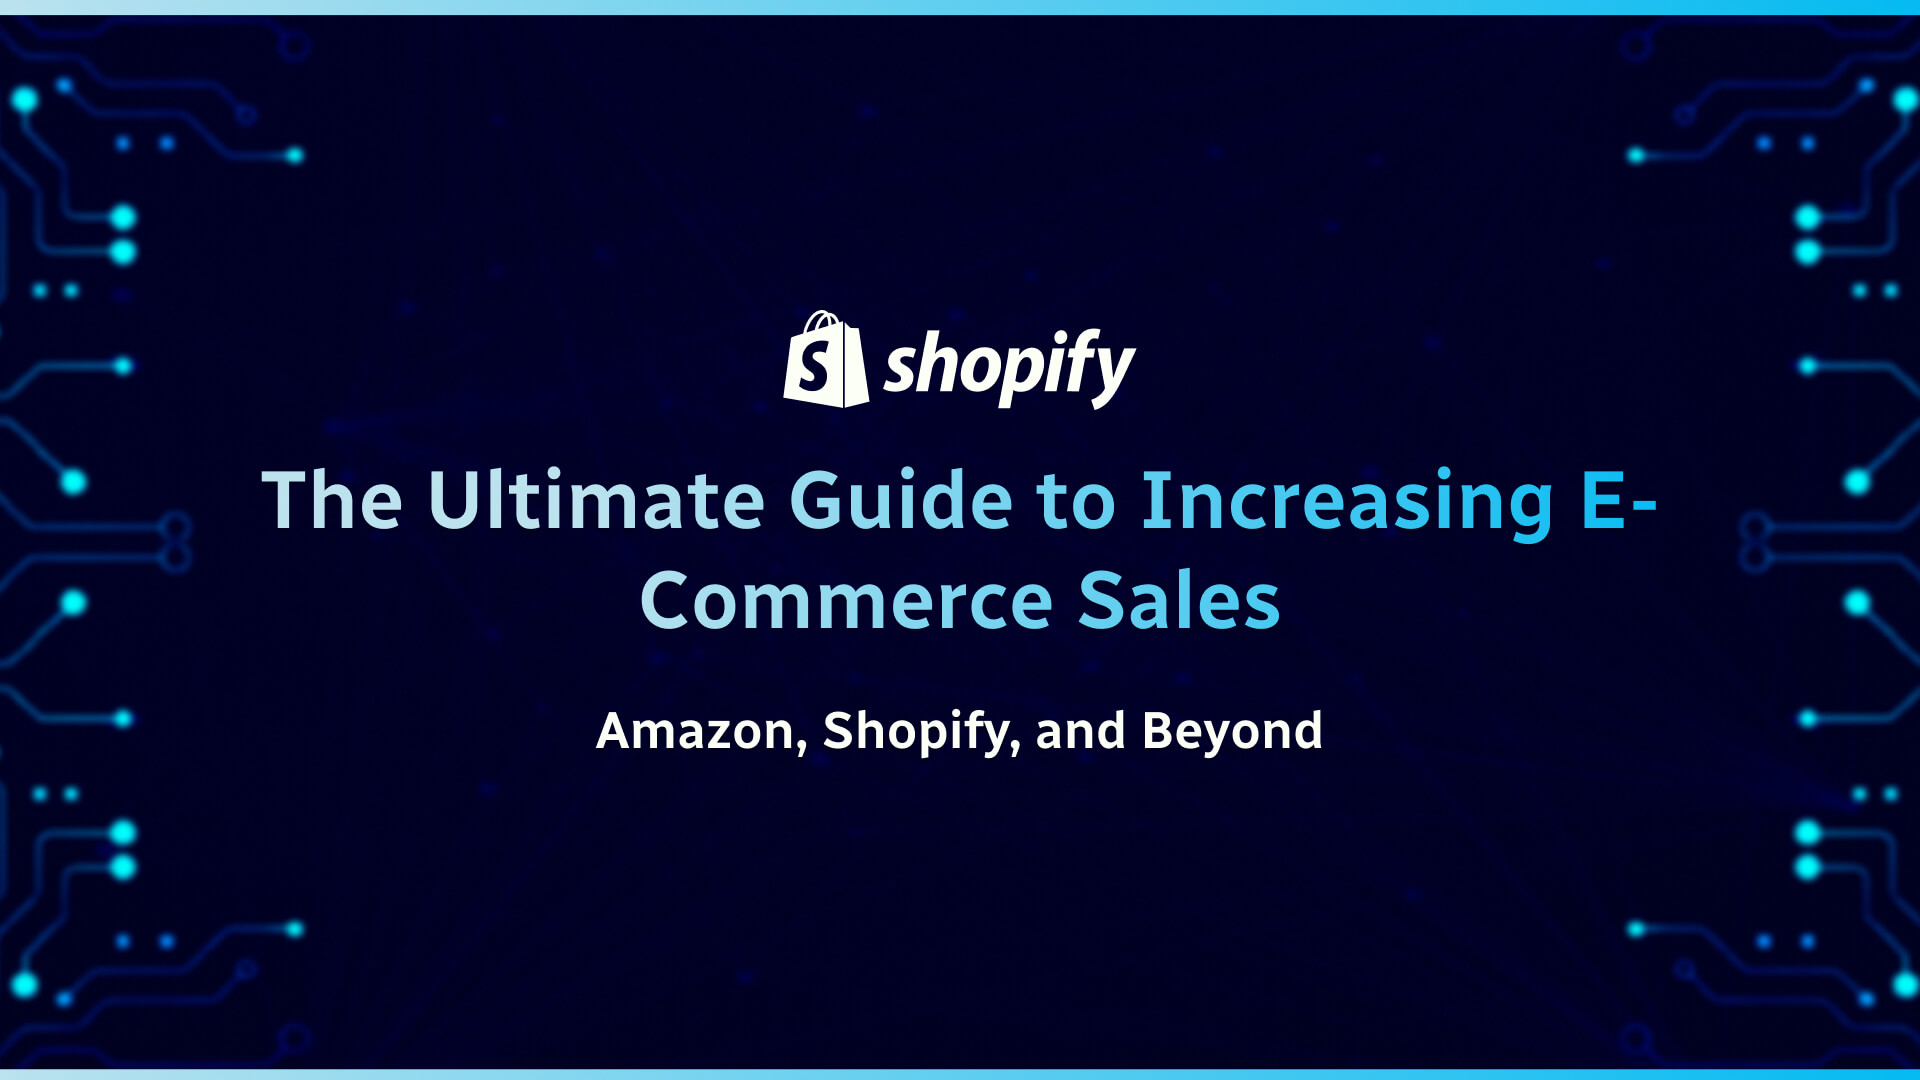 The Ultimate Guide to Increasing E-Commerce Sales: Amazon, Shopify, and Beyond